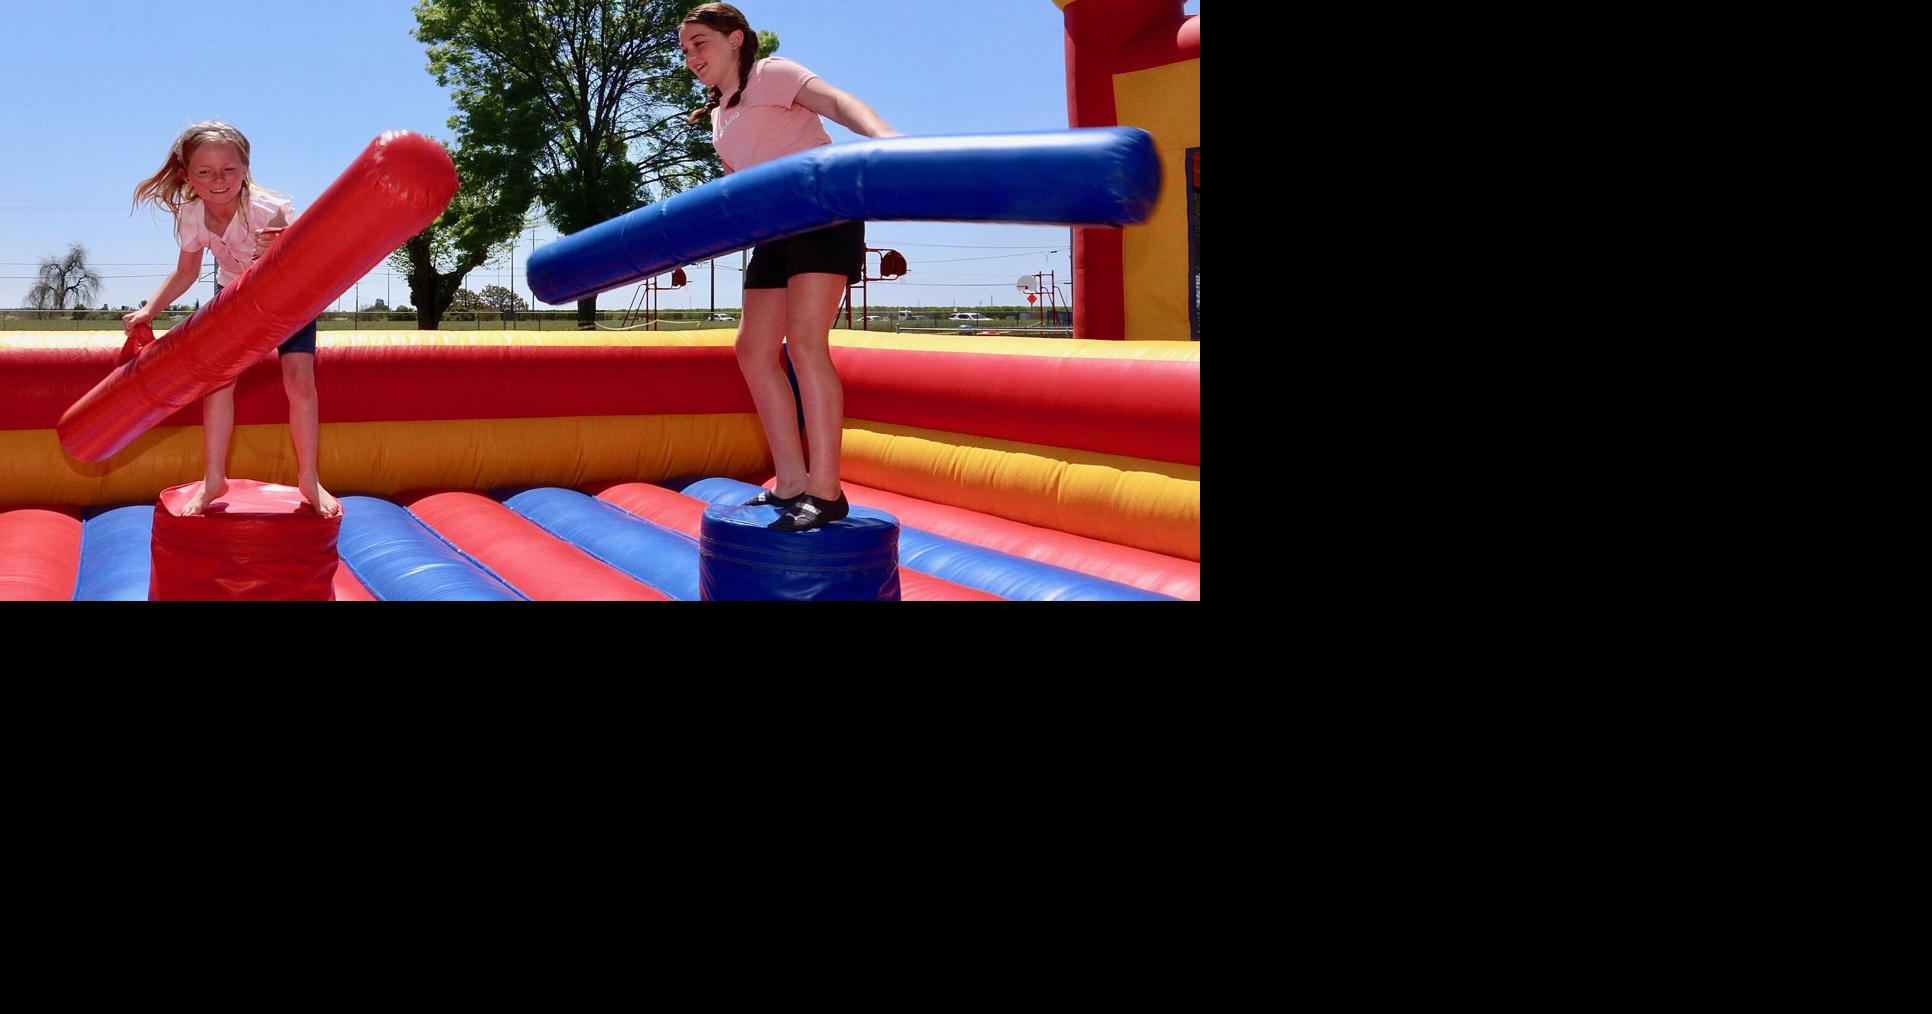 Kit Carson Spring Fling Carnival Draws Crowd To Raise Money For School Local News